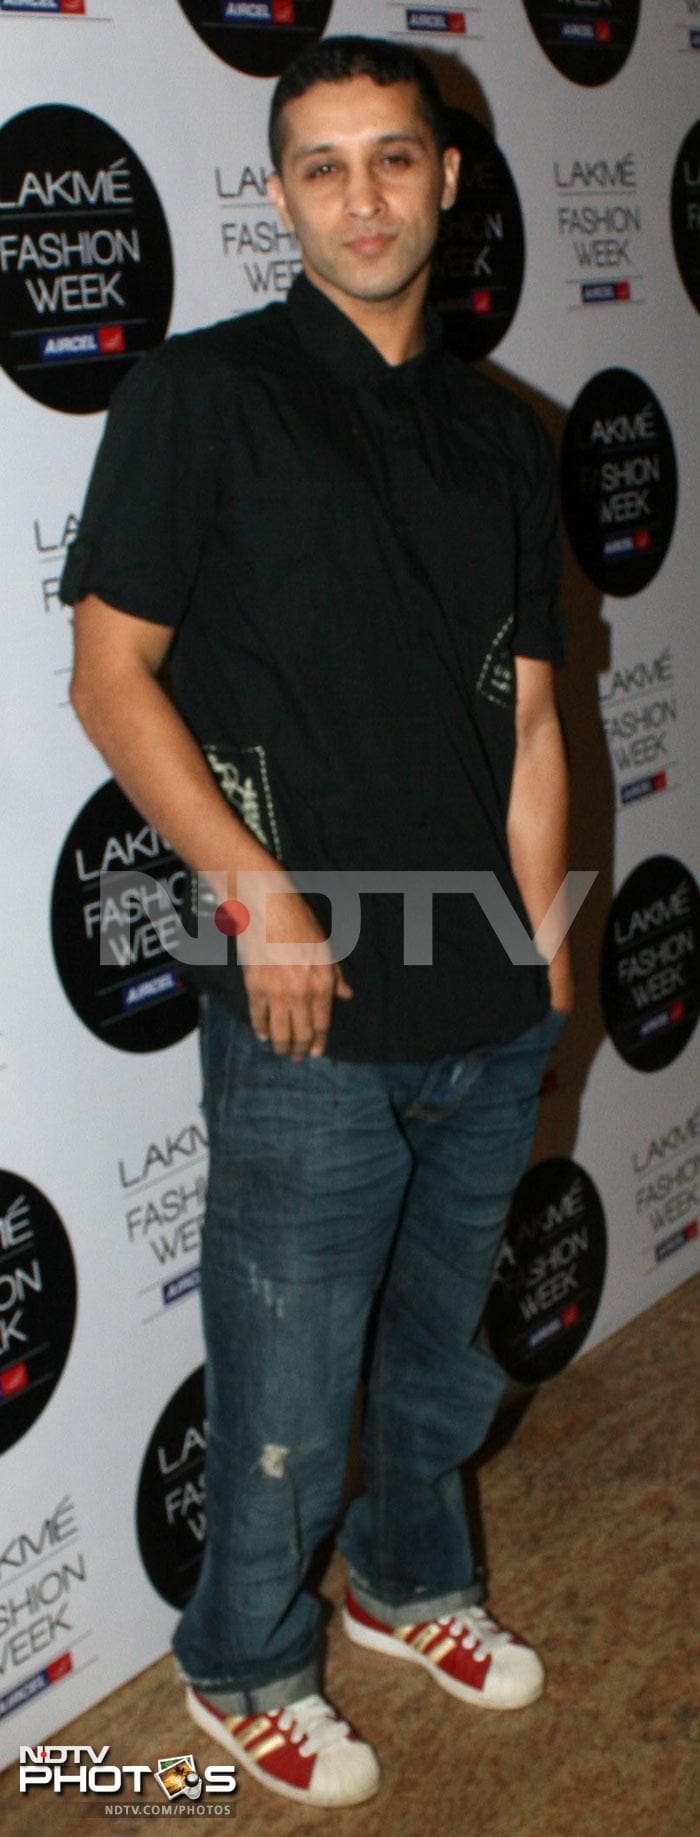 Celeb guest on day 2 of Lakme Fashion Week